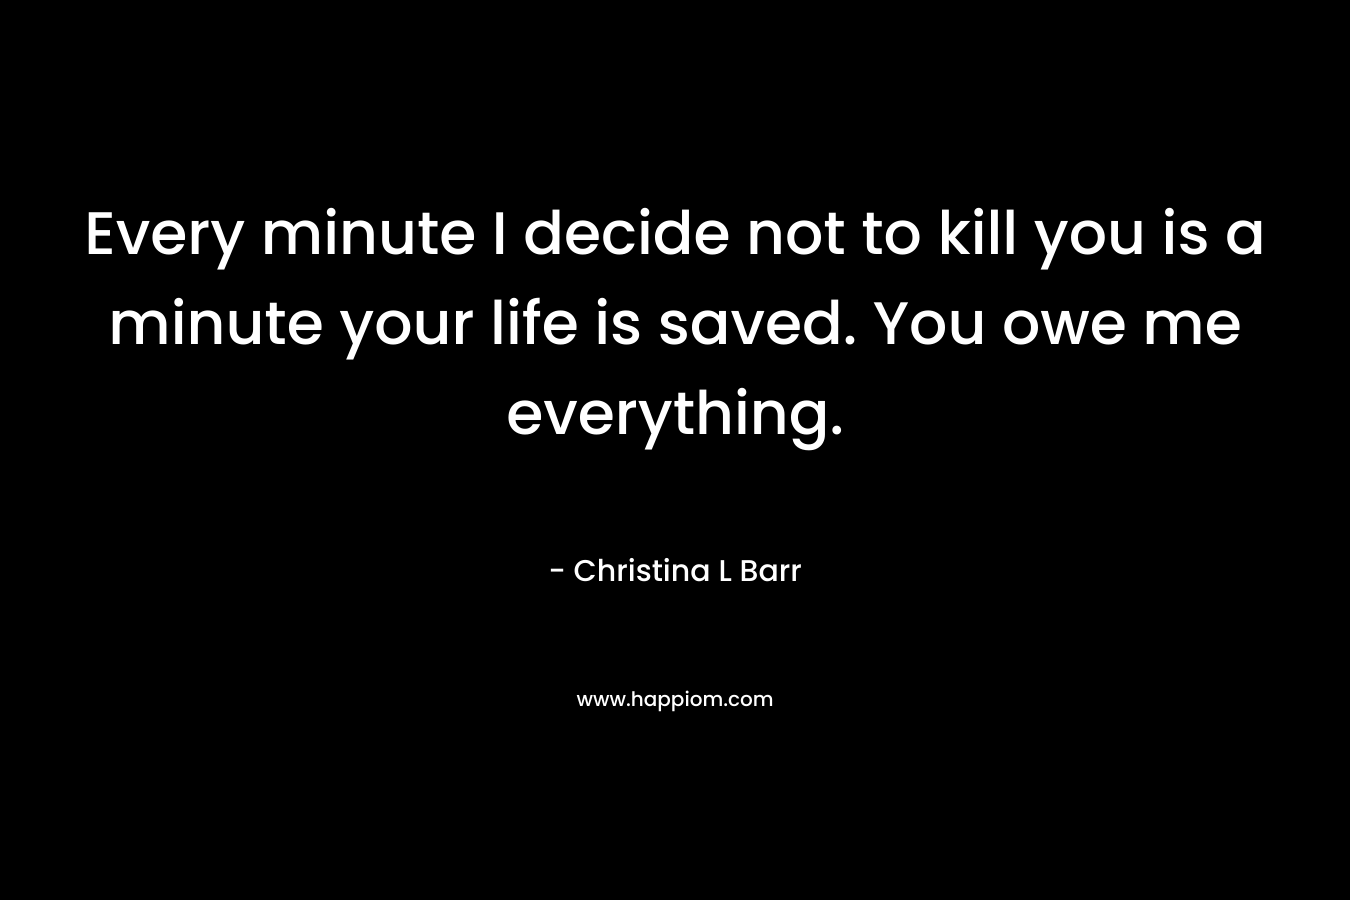 Every minute I decide not to kill you is a minute your life is saved. You owe me everything.